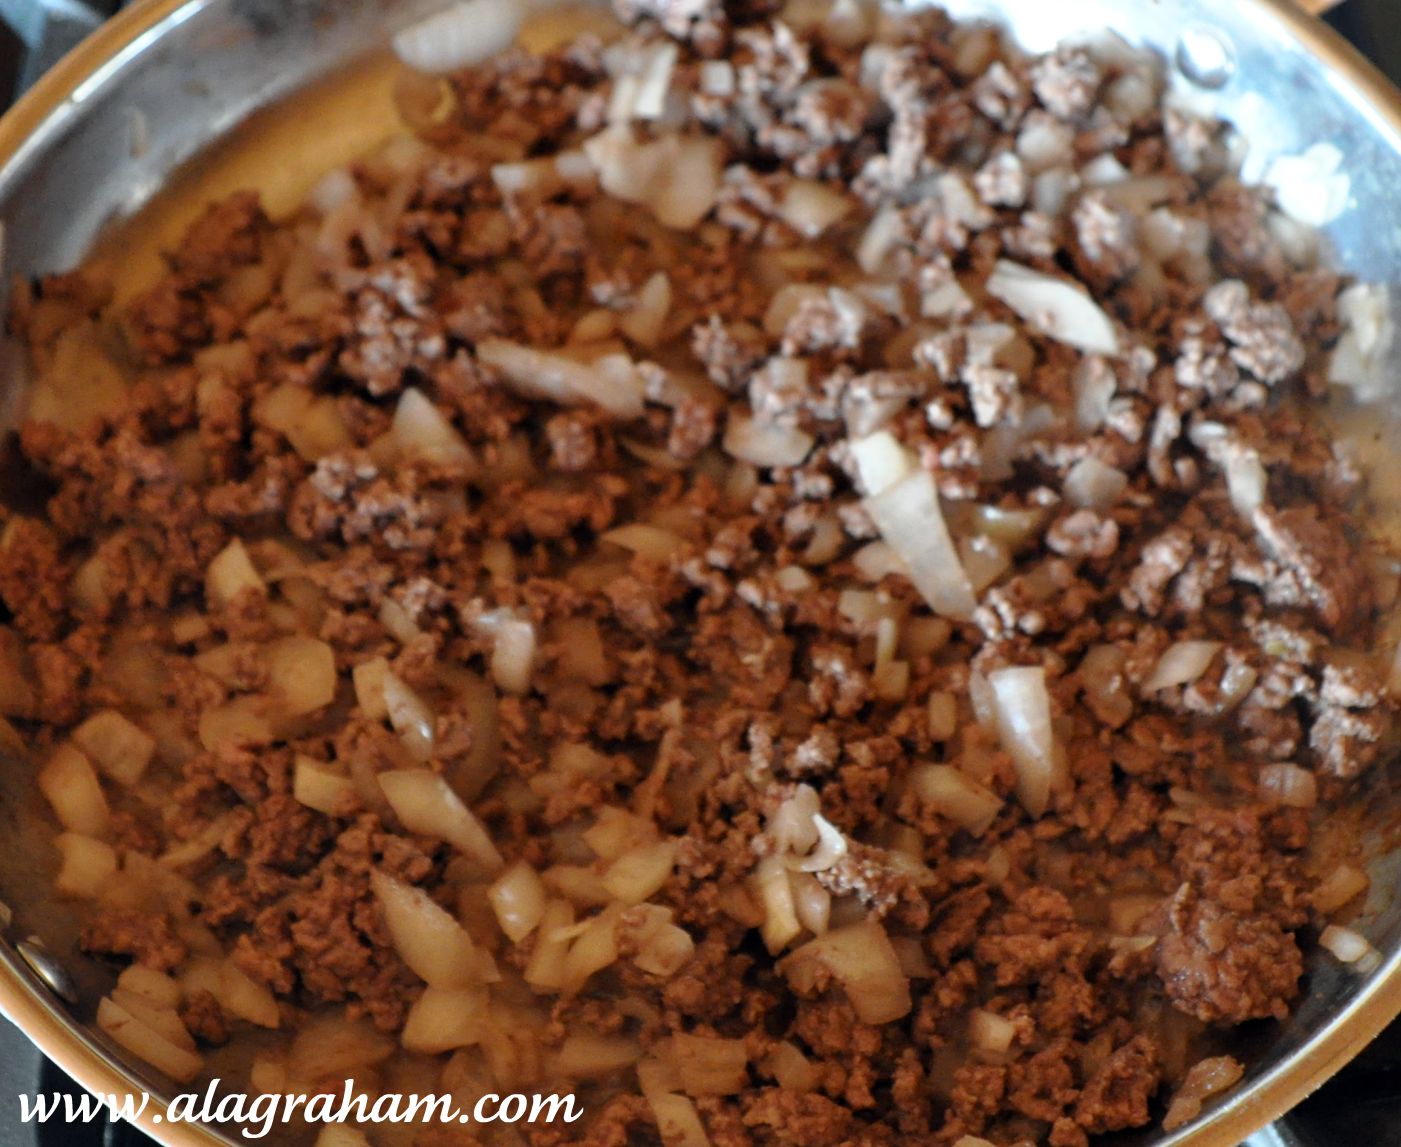 A LA GRAHAM: BEEF AND RICE